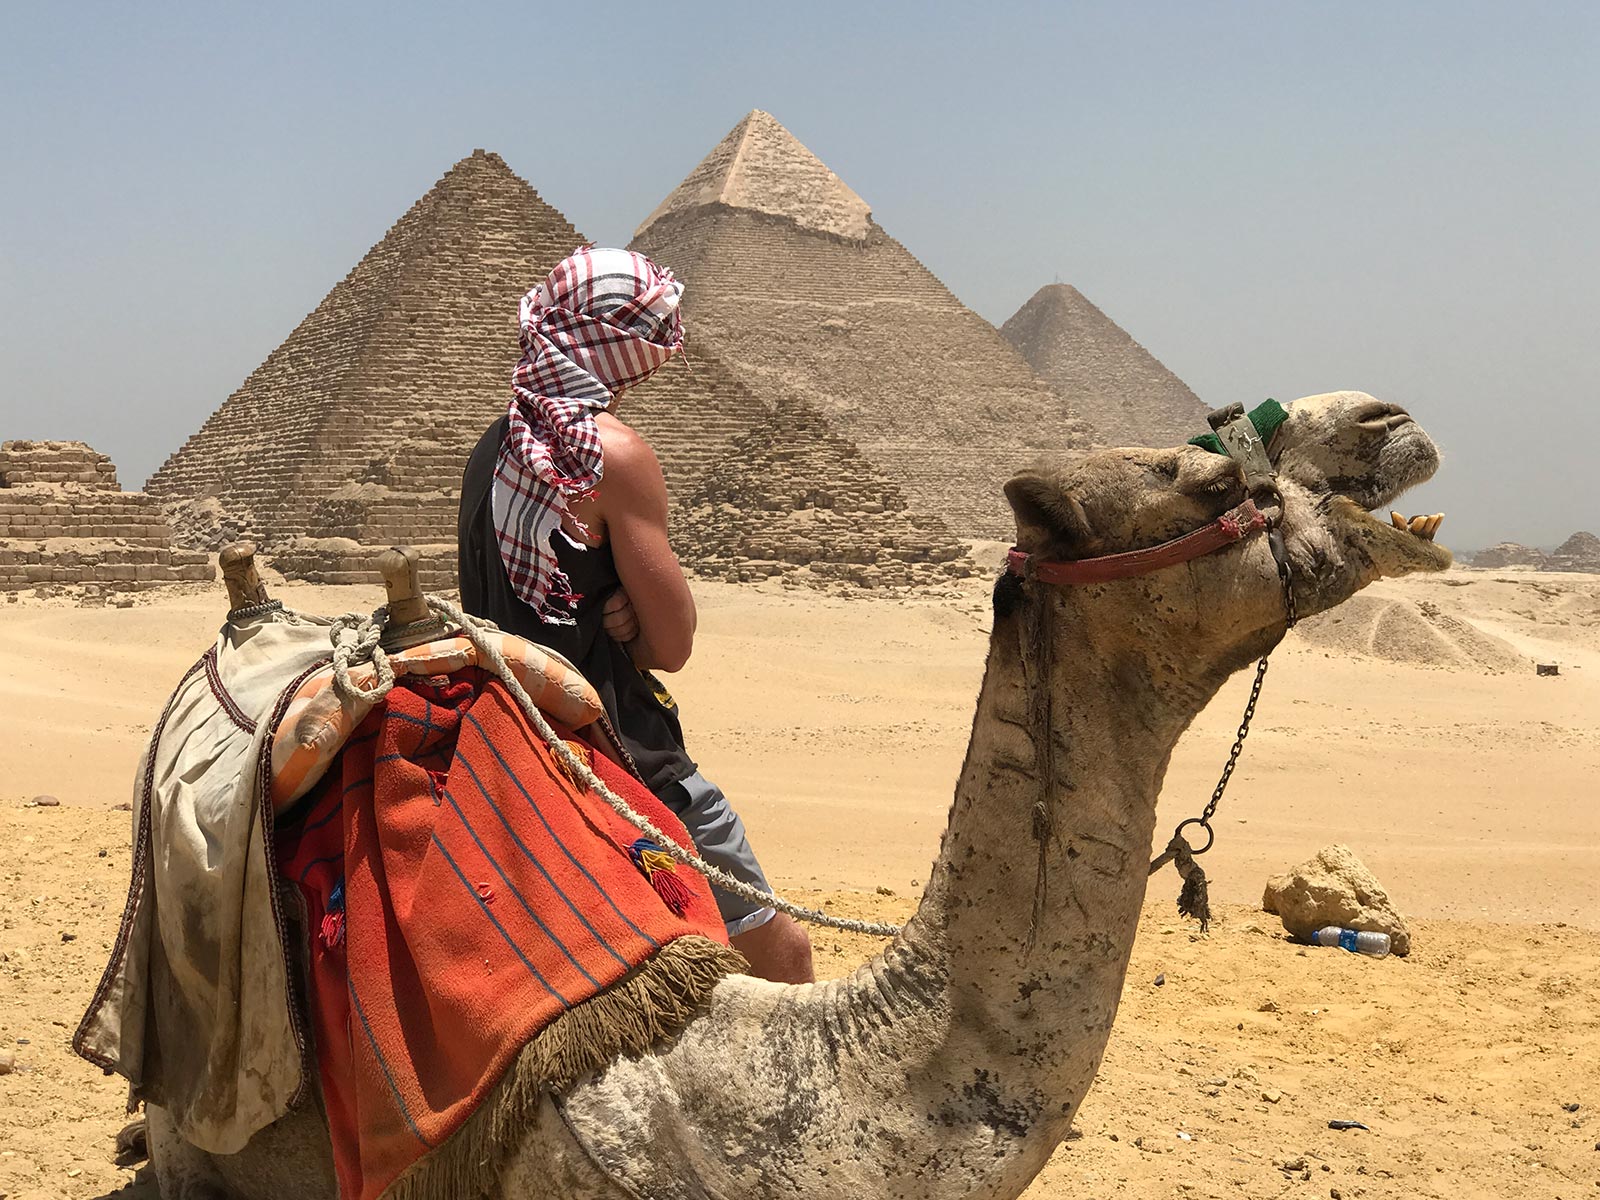 David Simpson with camel at the pyramids in Cairo, Egypt. Getting inside the Ancient Pyramids of Giza